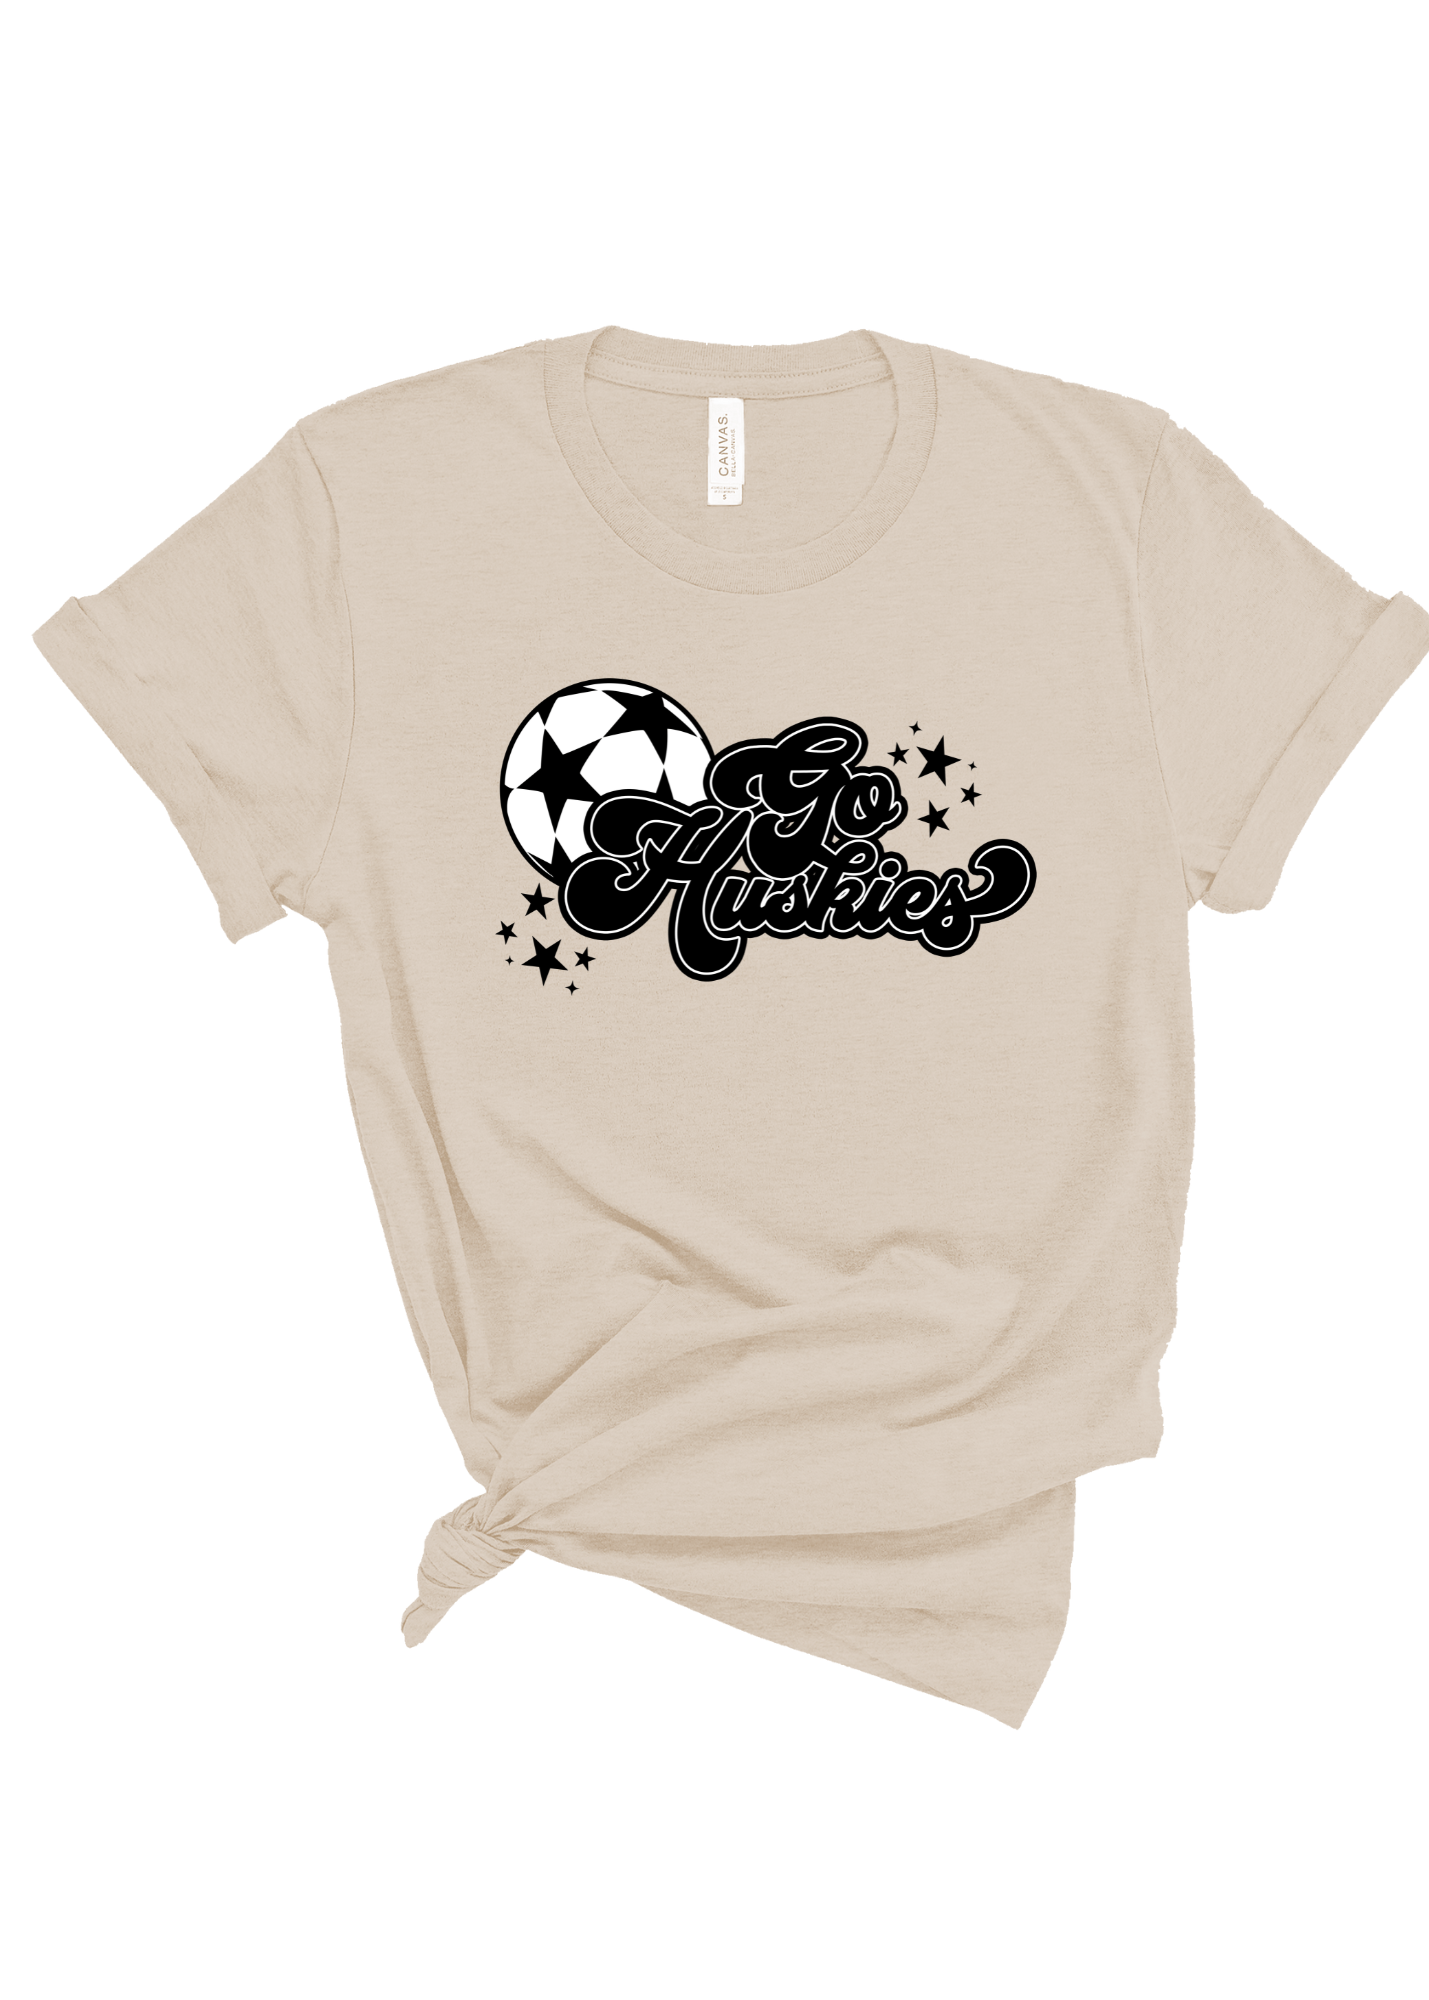 Groovy Soccer | Customizable | Tee | Adult-Adult Tee-Sister Shirts-Sister Shirts, Cute & Custom Tees for Mama & Littles in Trussville, Alabama.